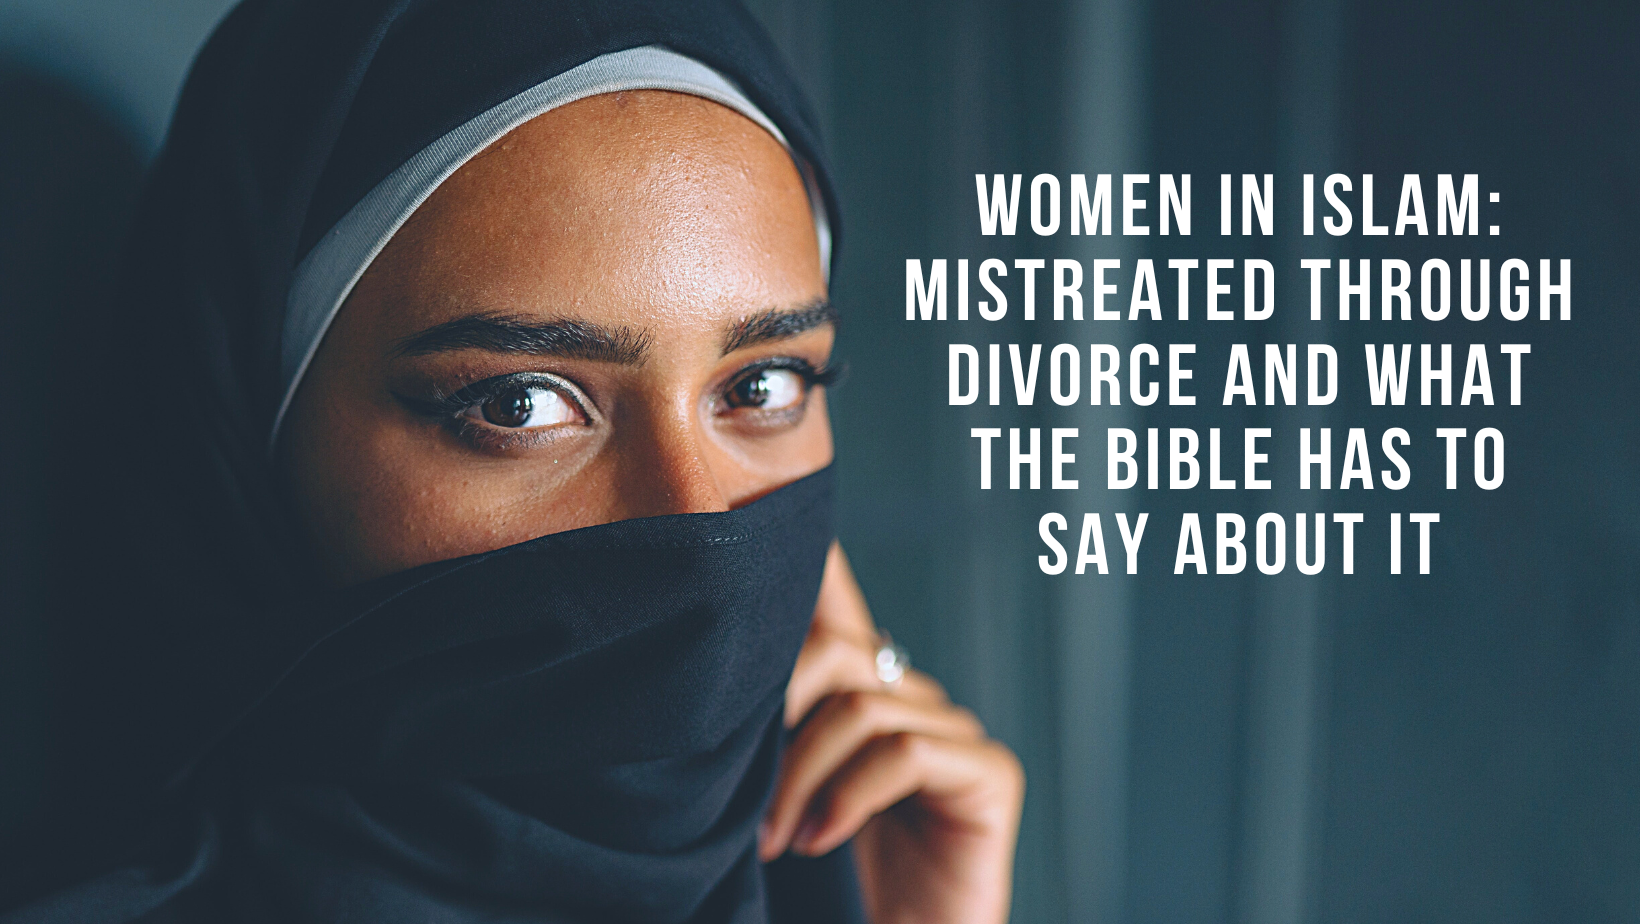 Women in Islam: Mistreated through divorce and what the Bible has to say about it